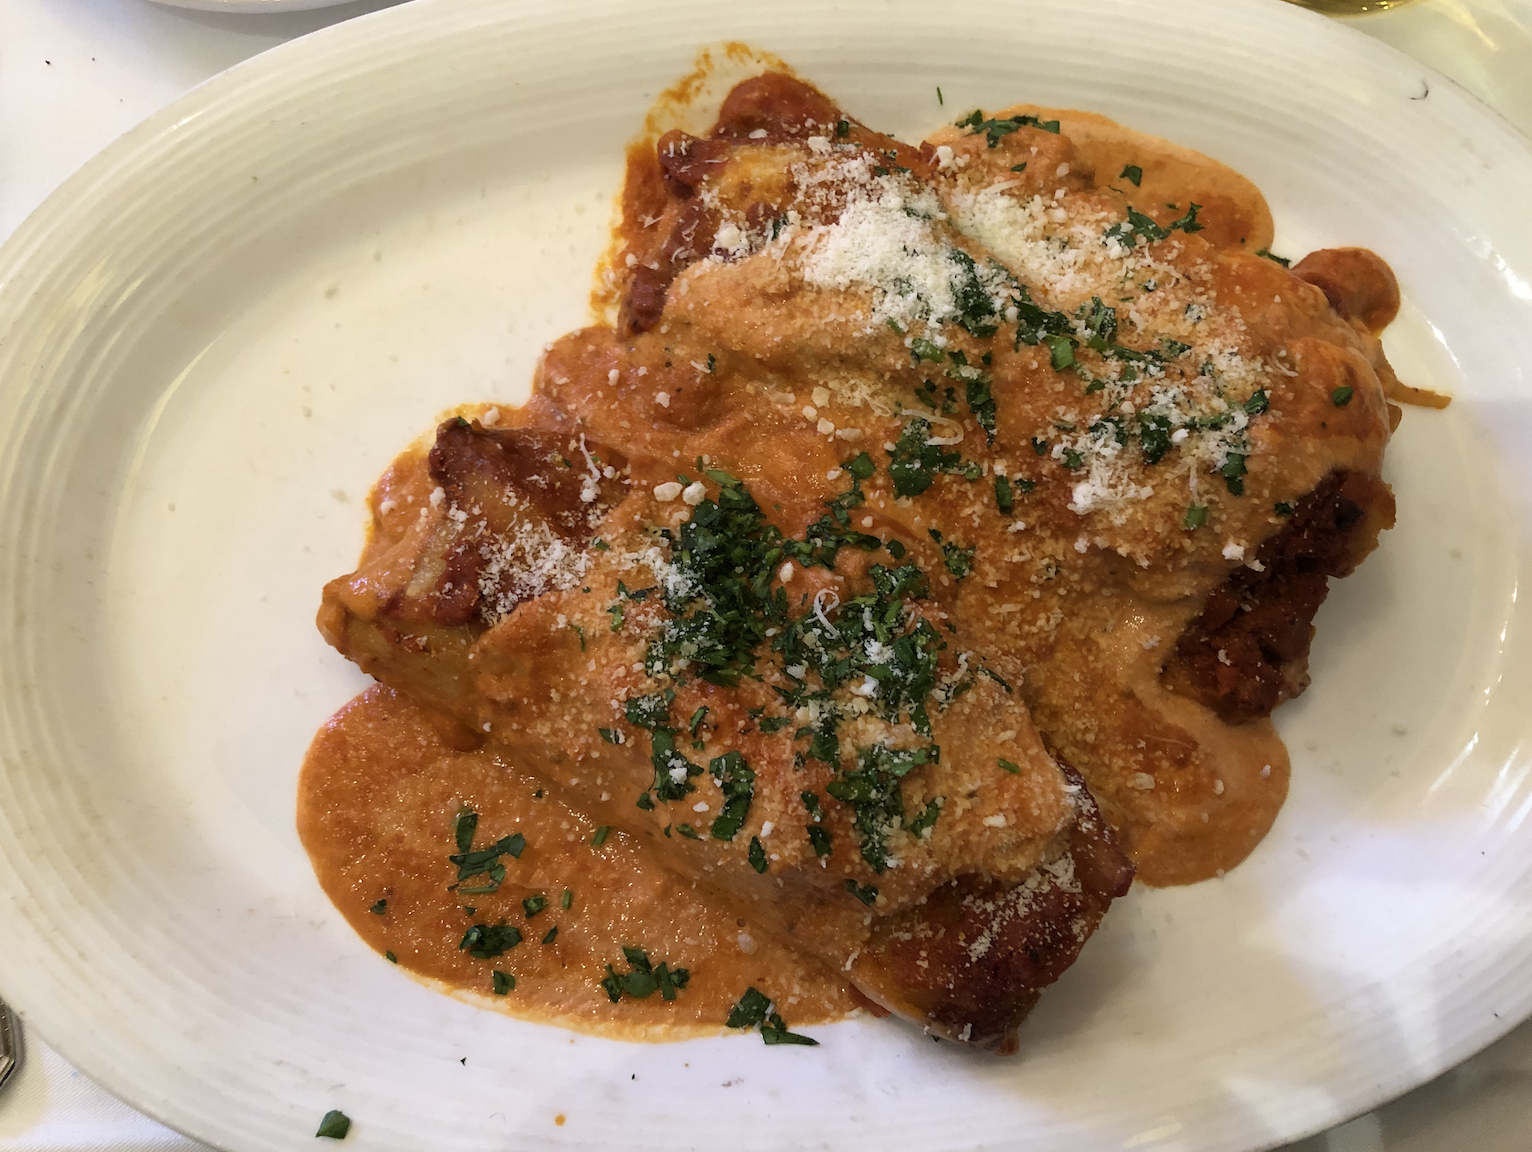 The cannelloni is served with two pieces of stuffed pasta, garnished with cheese, sauce and chopped herbs.